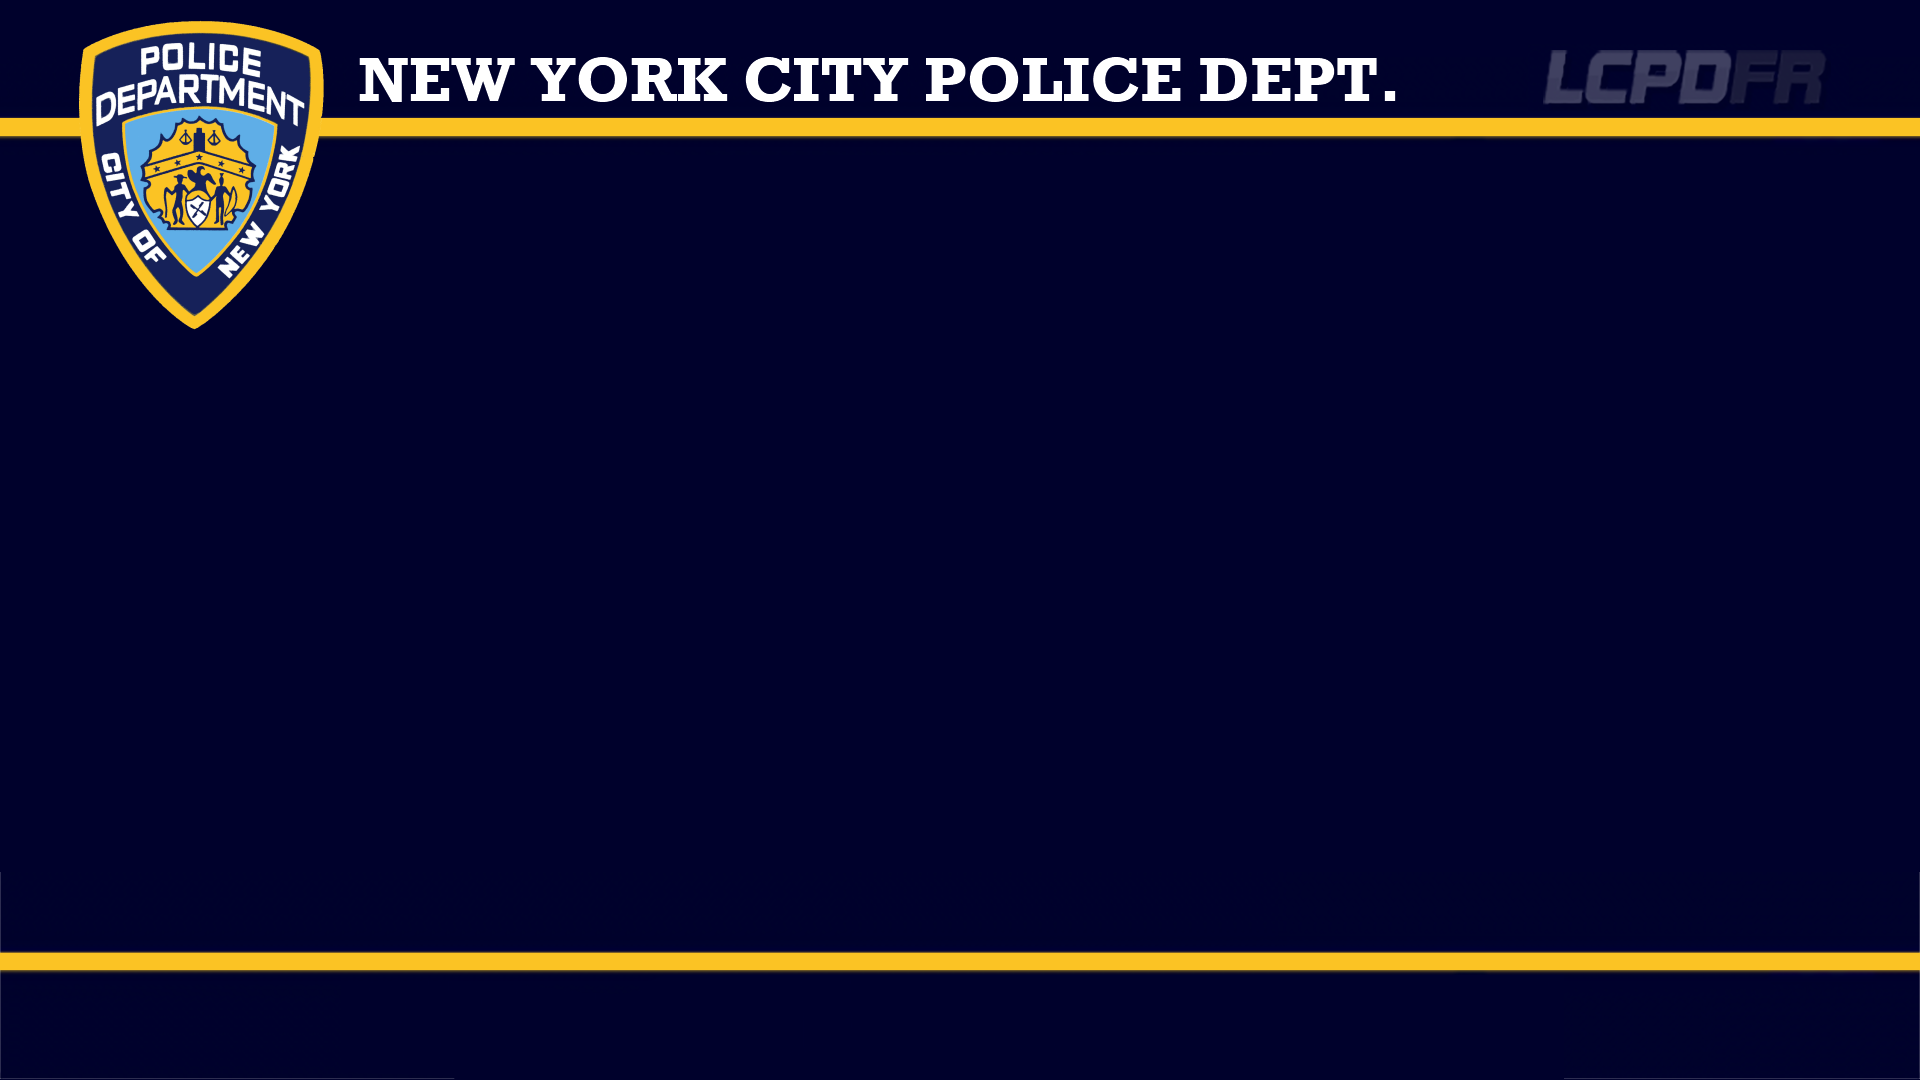 NYPD Police Computer Skin Modifications & Files